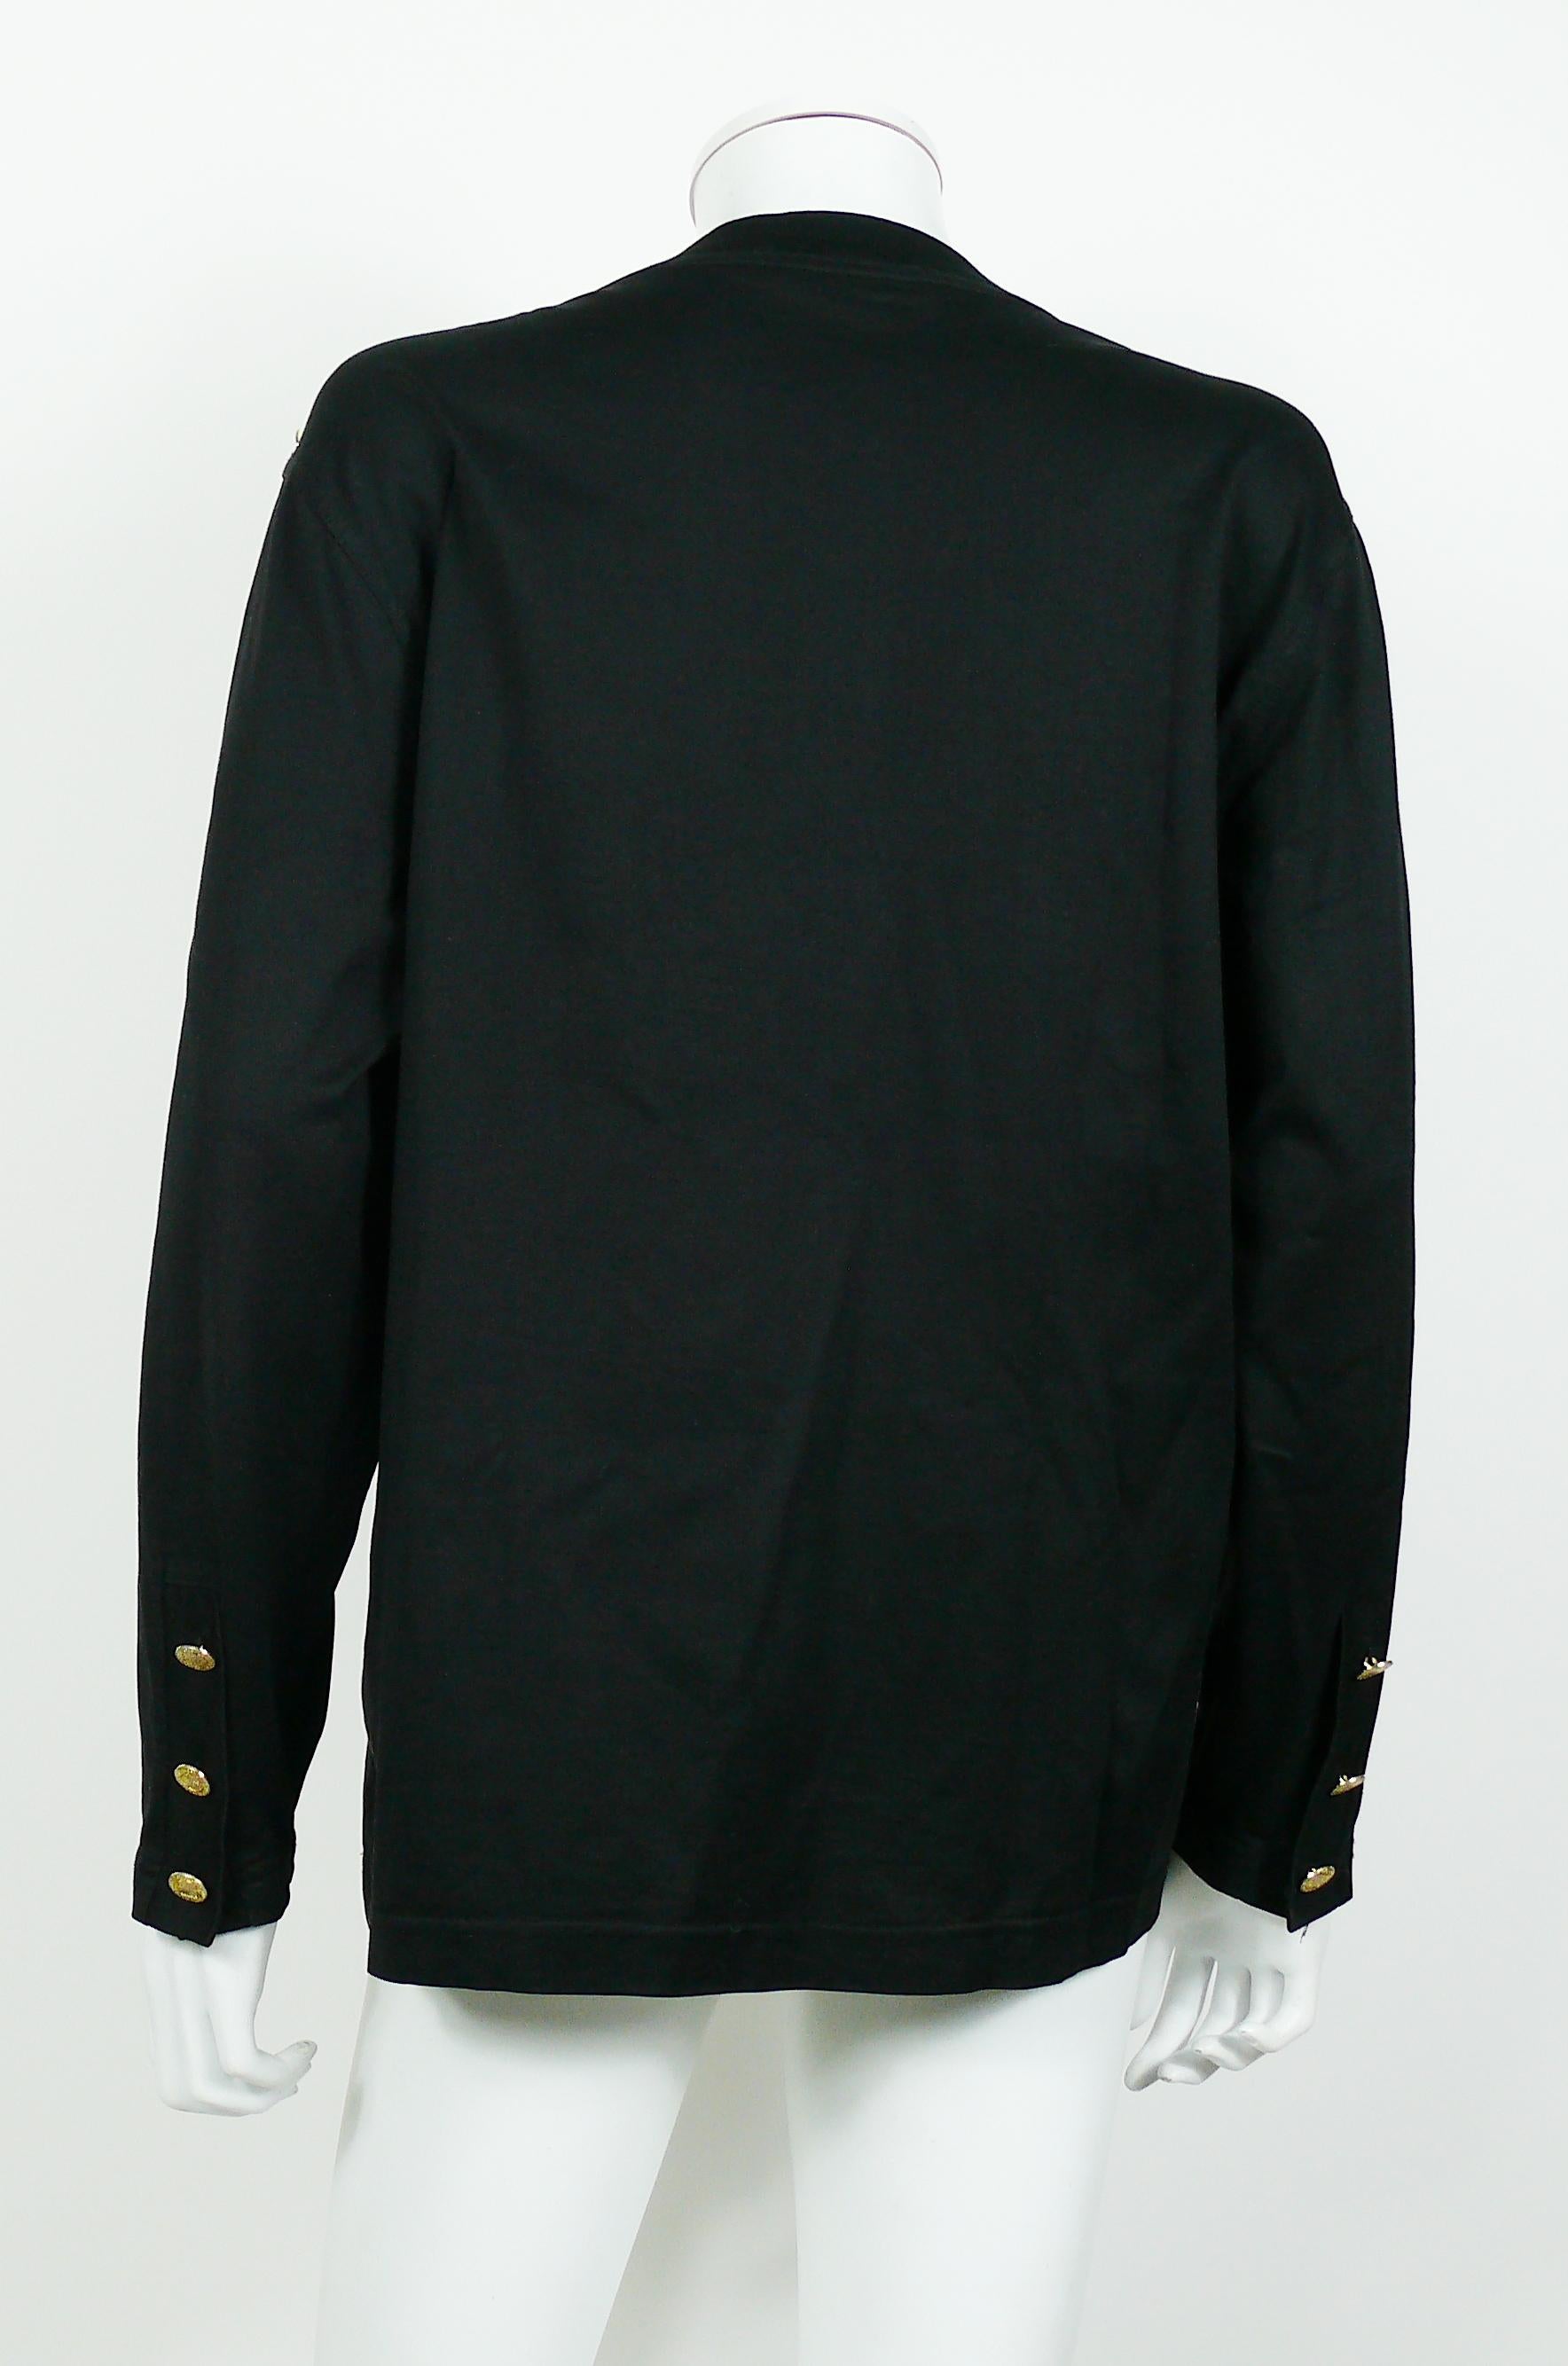 Yves Saint Laurent YSL Vintage Signature Black Top   In Good Condition For Sale In Nice, FR